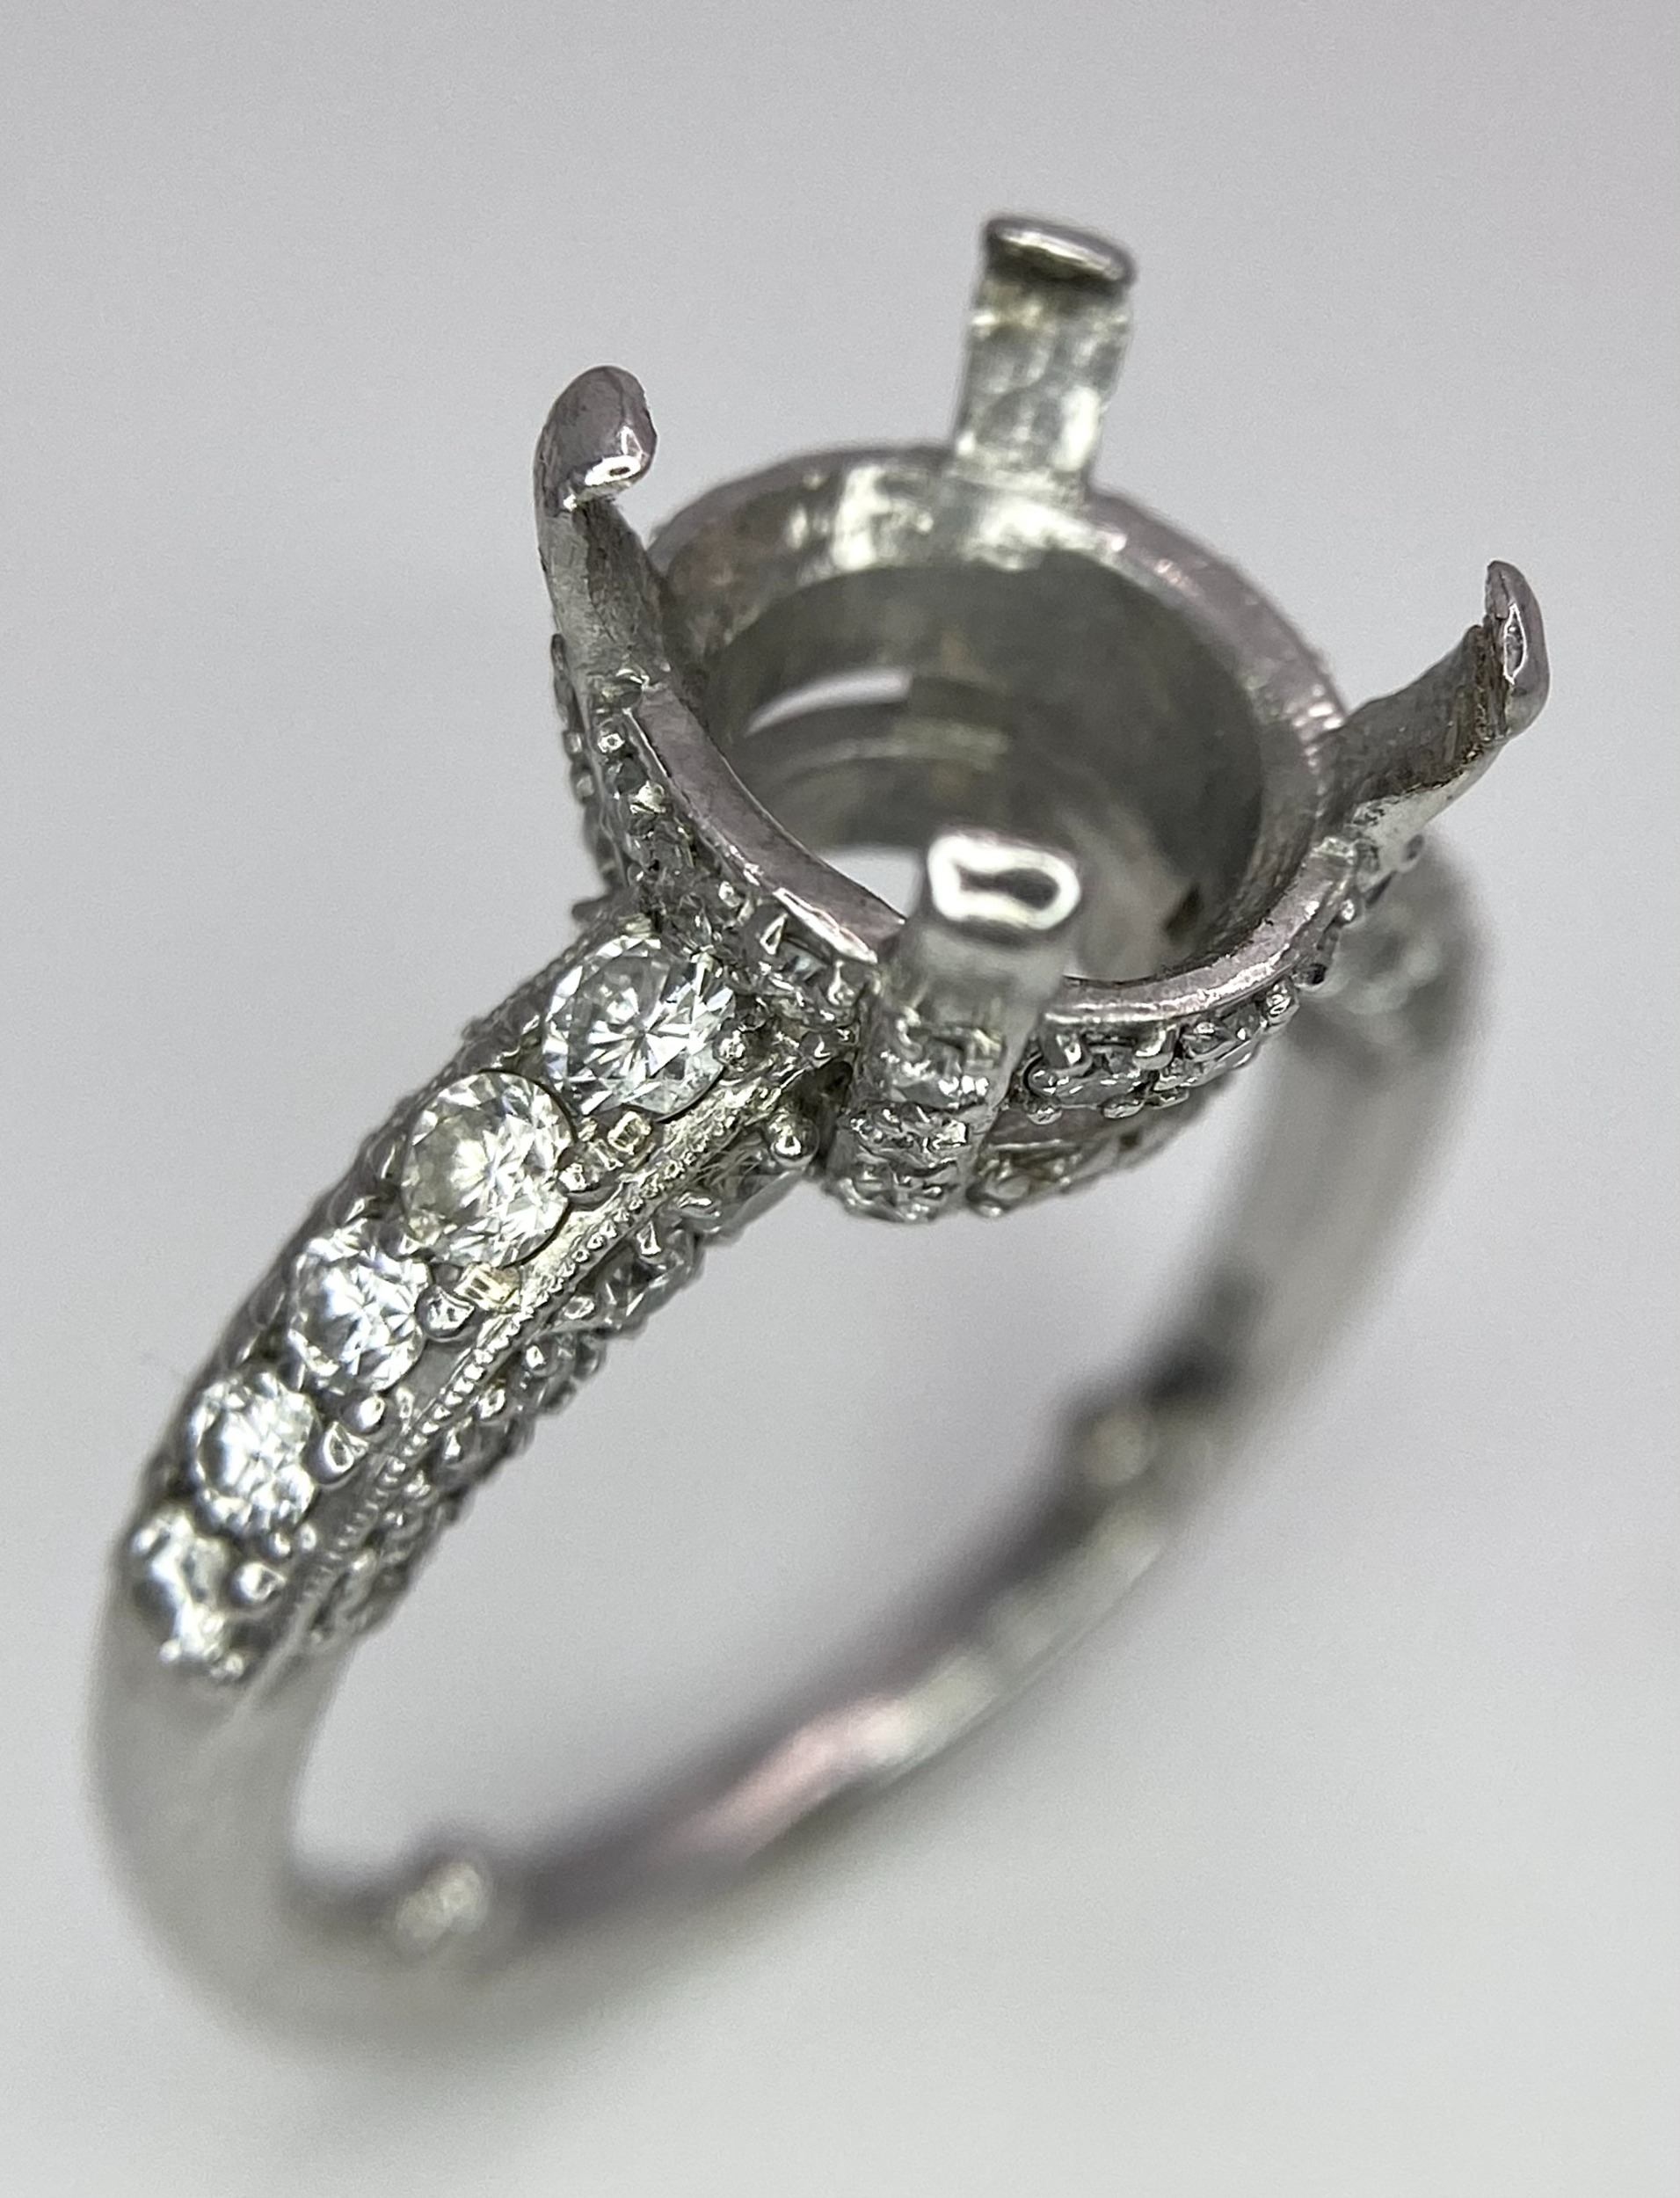 AN 18K WHITE GOLD 4 CLAW SINGLE STONE RING WITH DIAMOND SET BEZEL, SHOULDERS AND SIDES - Ready to